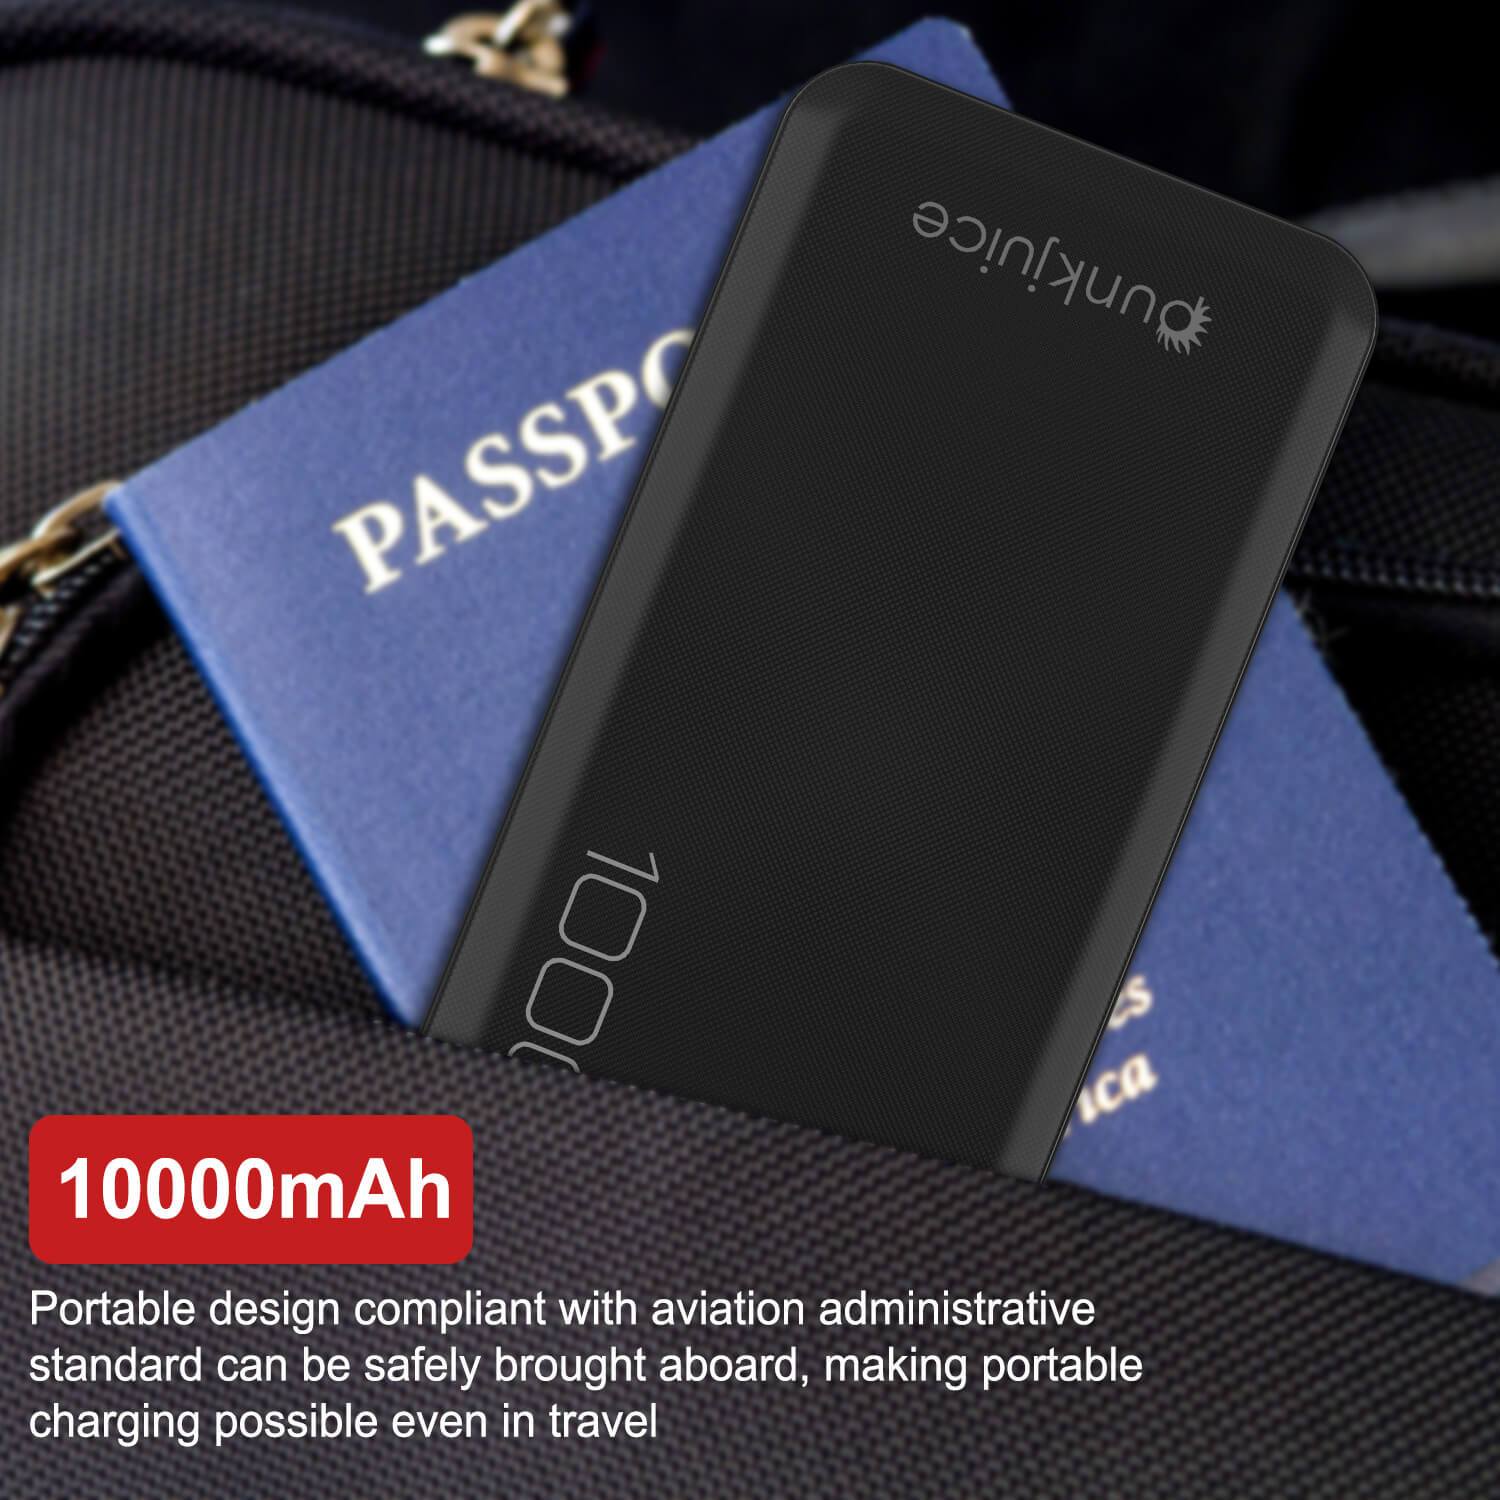 PunkCase PowerBank 10000mah Battery Pack for iPhone X/XS/Max/XR / 11/10, iPad, Samsung Galaxy S10 / S9 and Many More [Black]